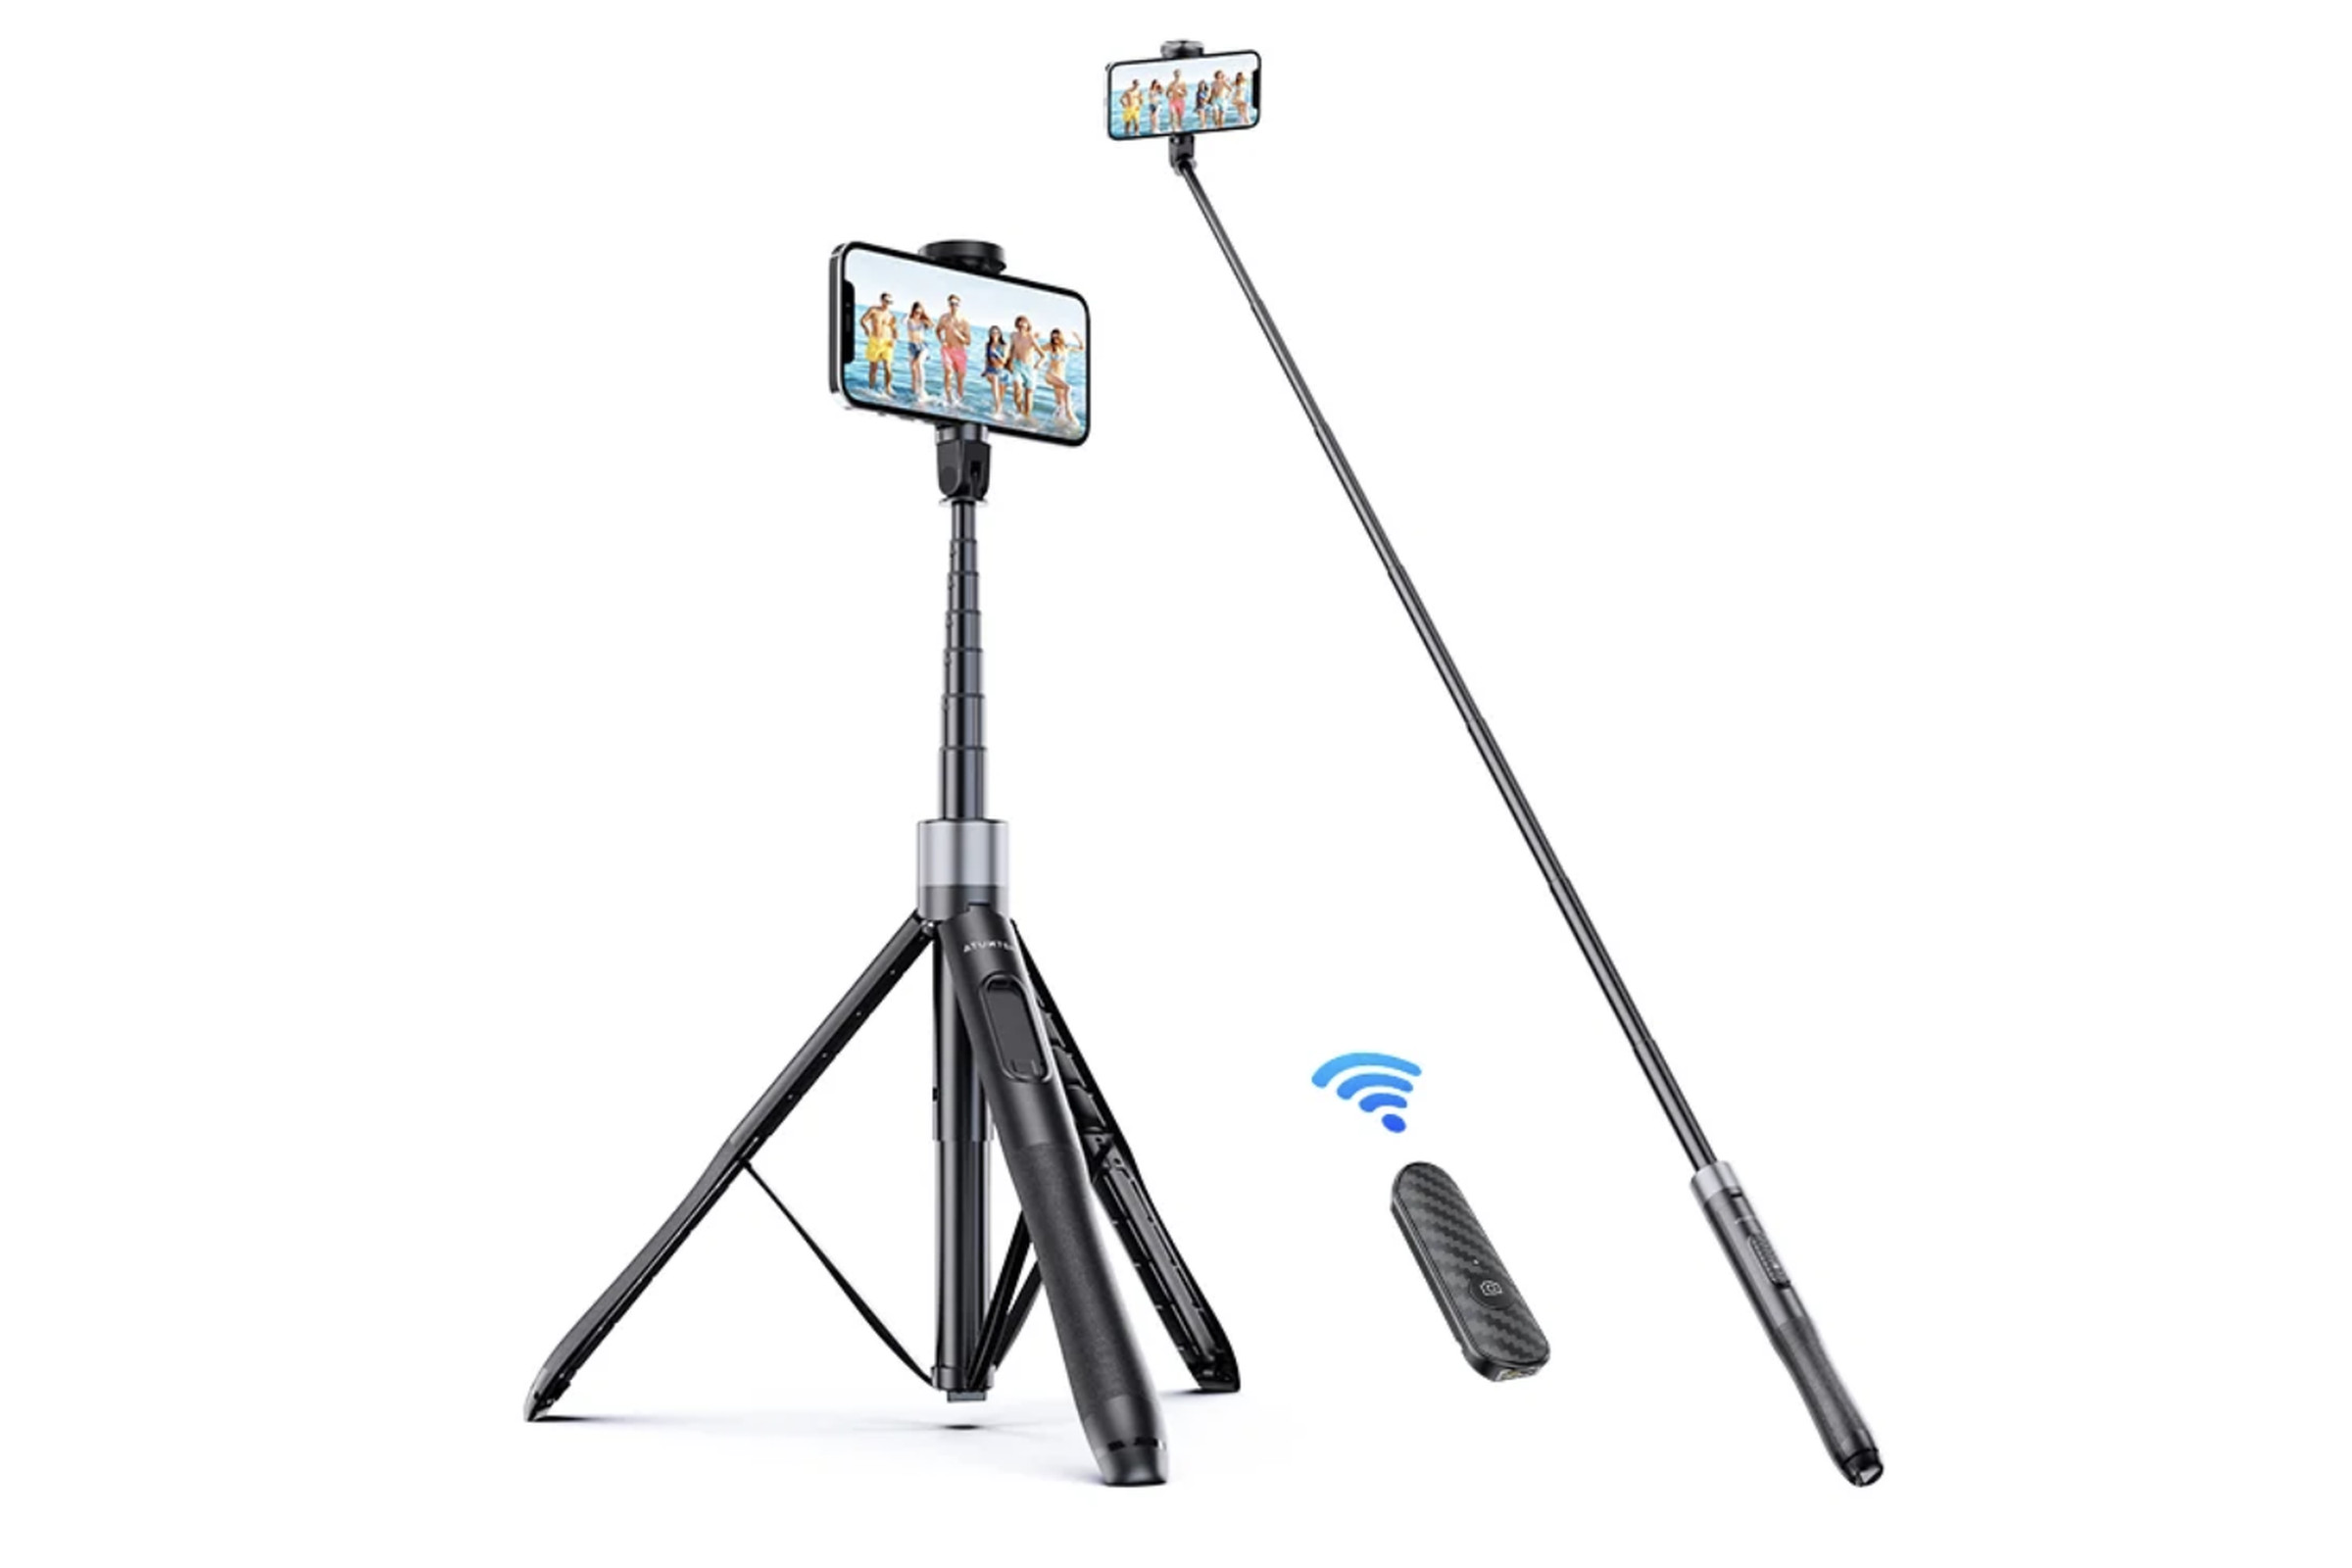 Selfie stick as a tripod and as an expanded stick, with a Bluetooth enabled remote.